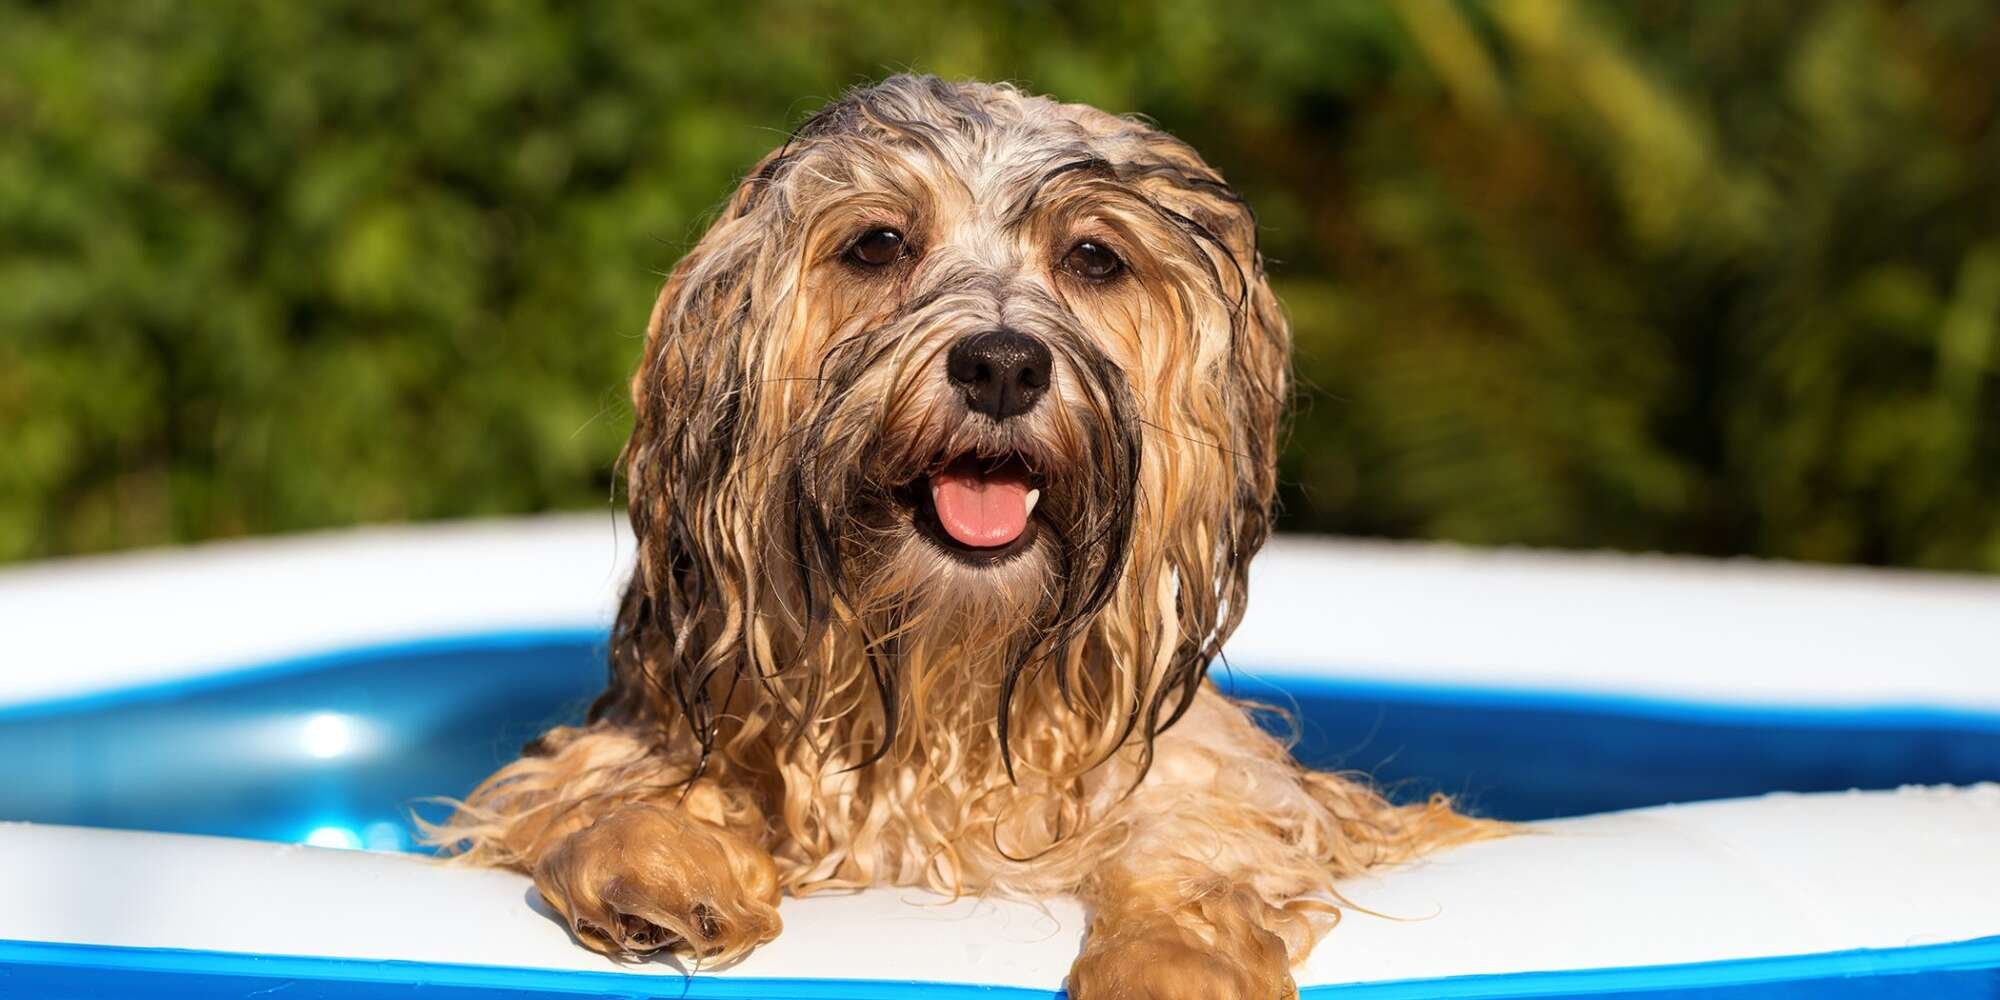 Heatstroke in Dogs Can Be a Real Problem, So Learn How to Prevent it